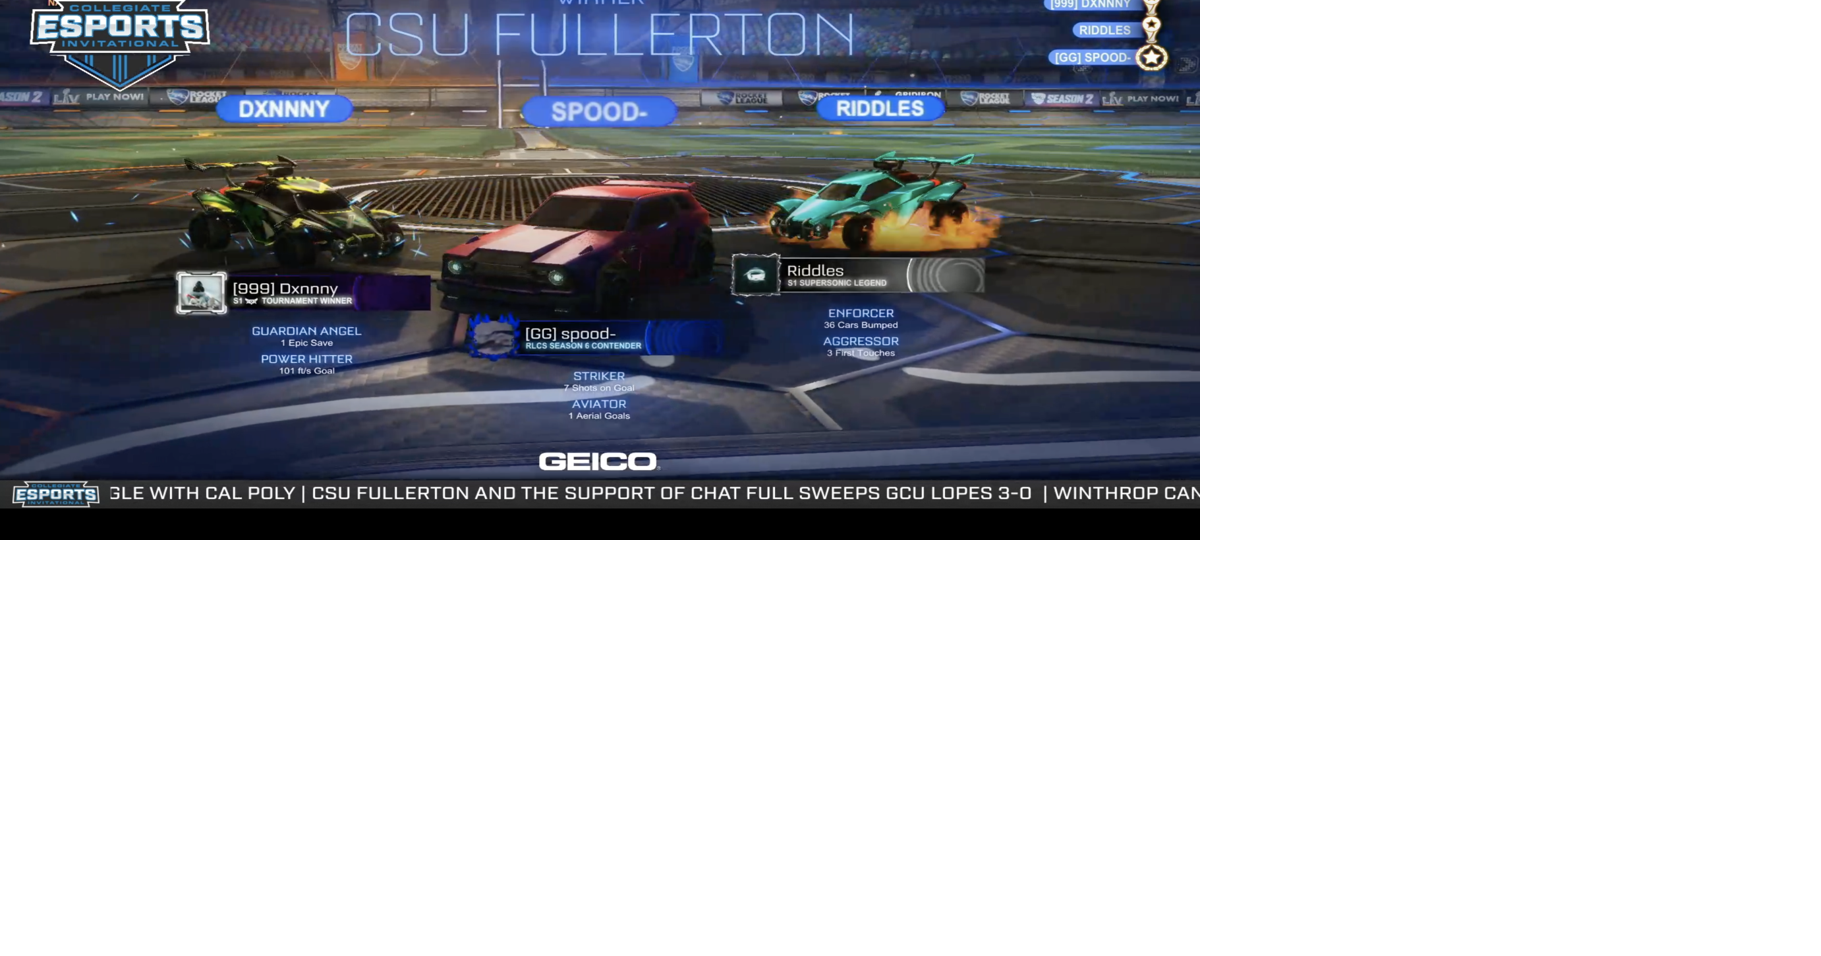 Crowning The Ultimate Rank In Rocket League (Tournament) 